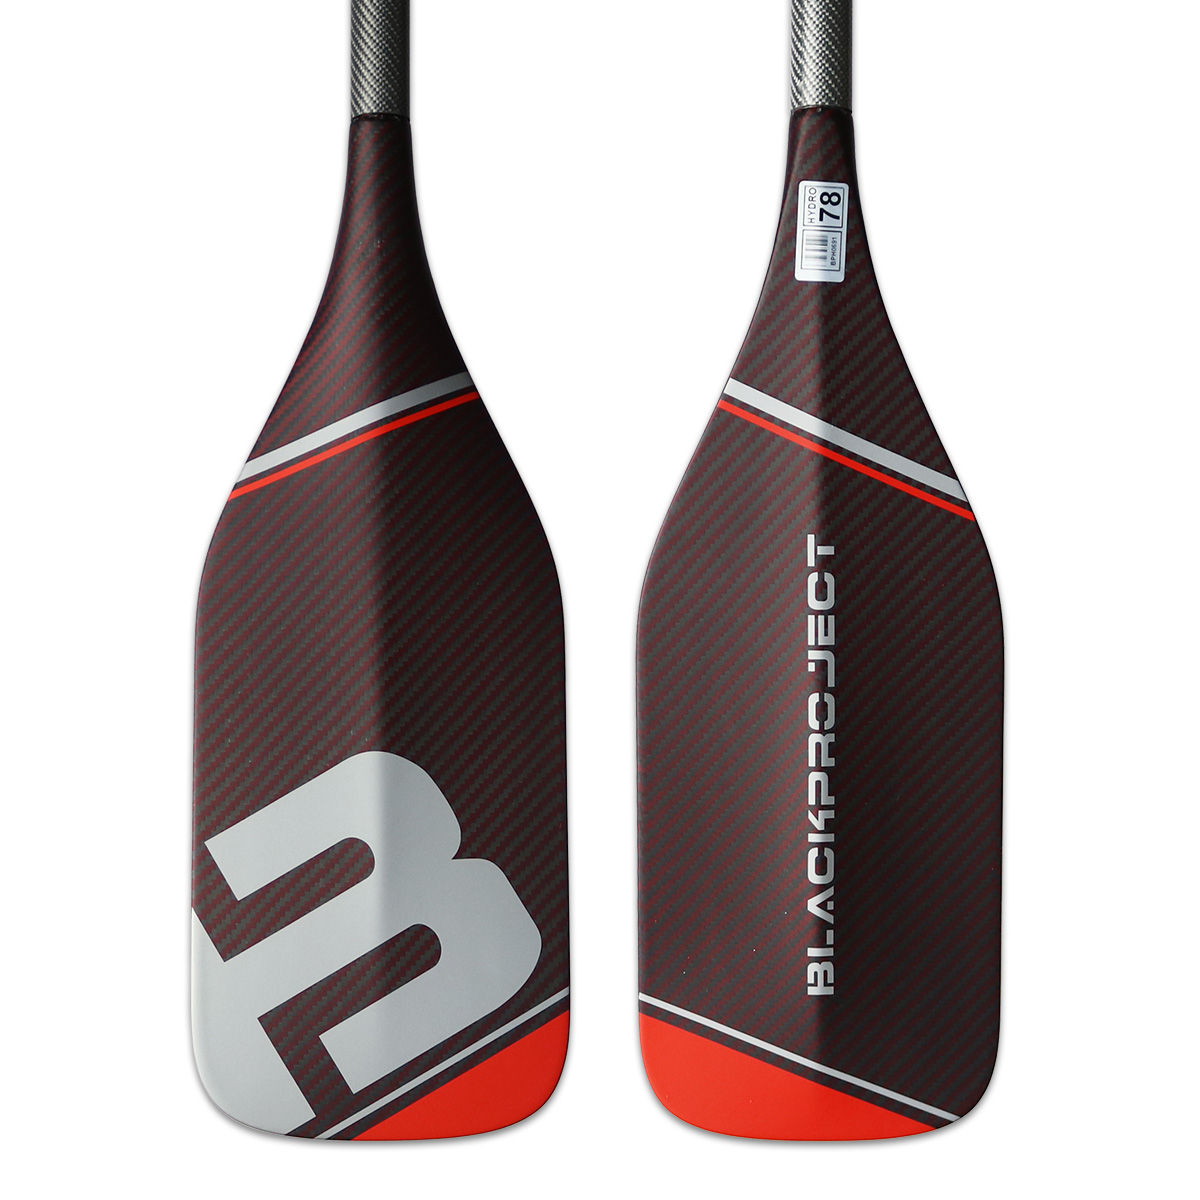 black project sup, hydro paddle, racing, sup, faster, lightest, strongest stand up paddling paddle, texalium, kevlar, carbon